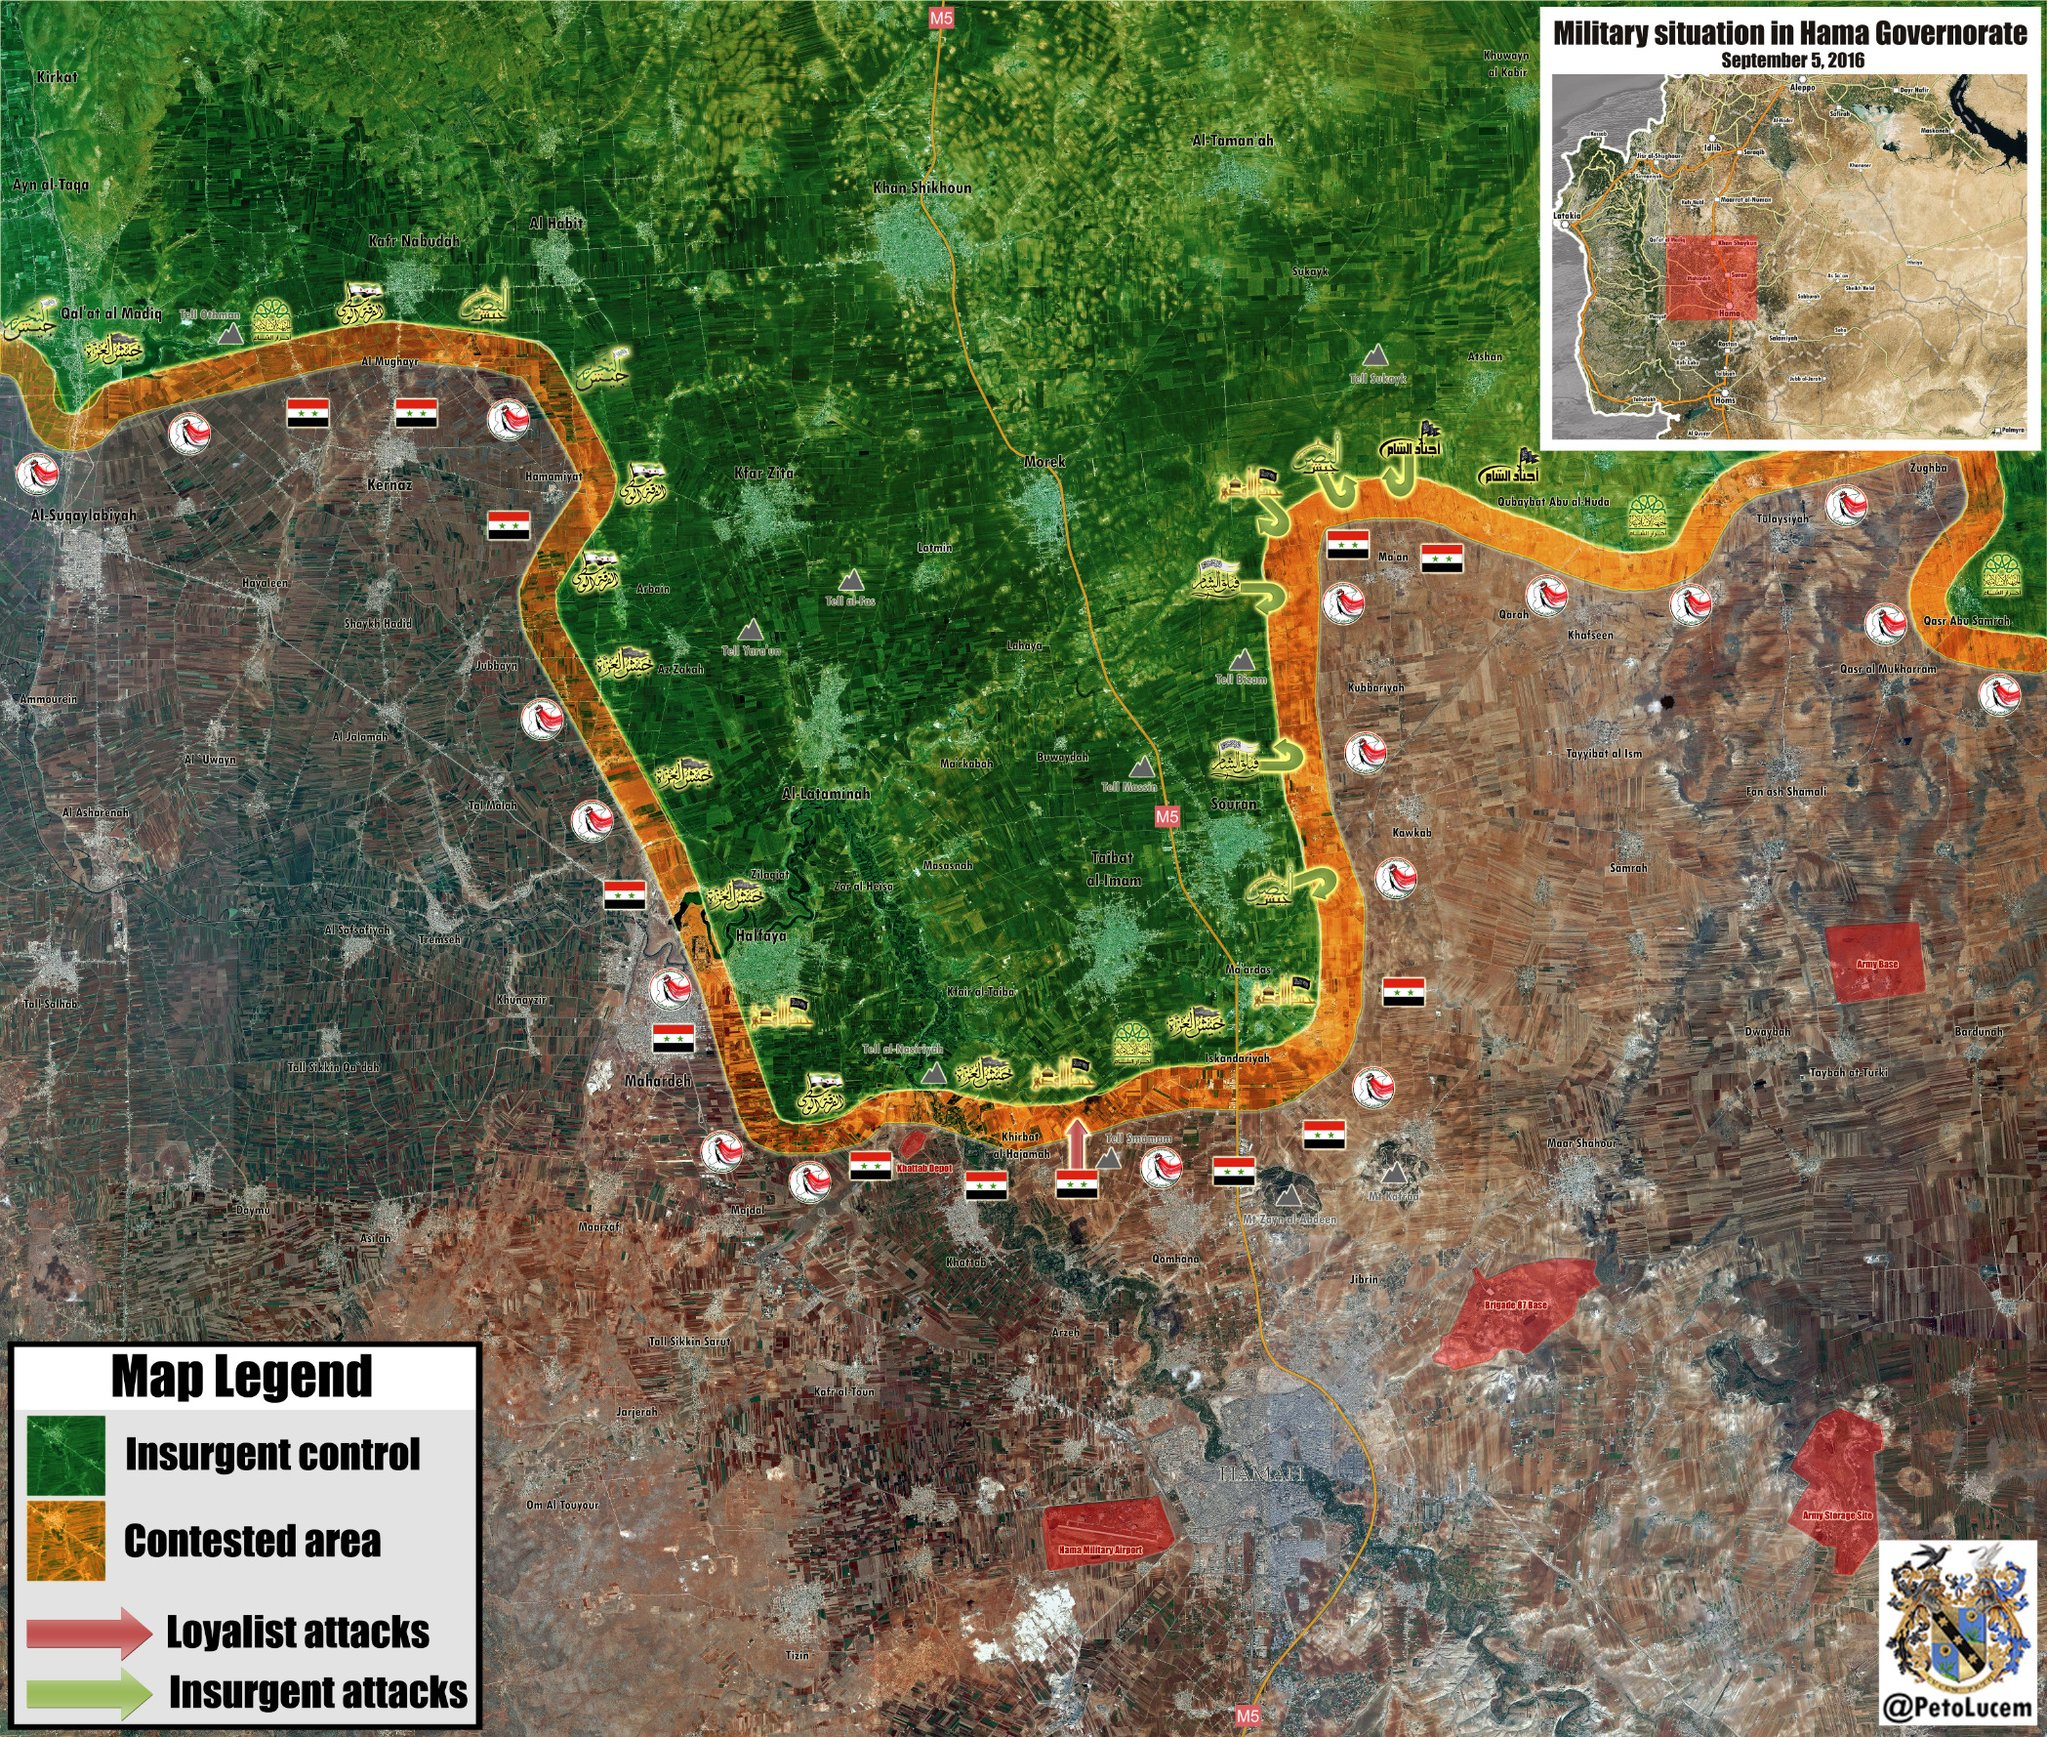 Overview of Military Situation in Syria on September 6